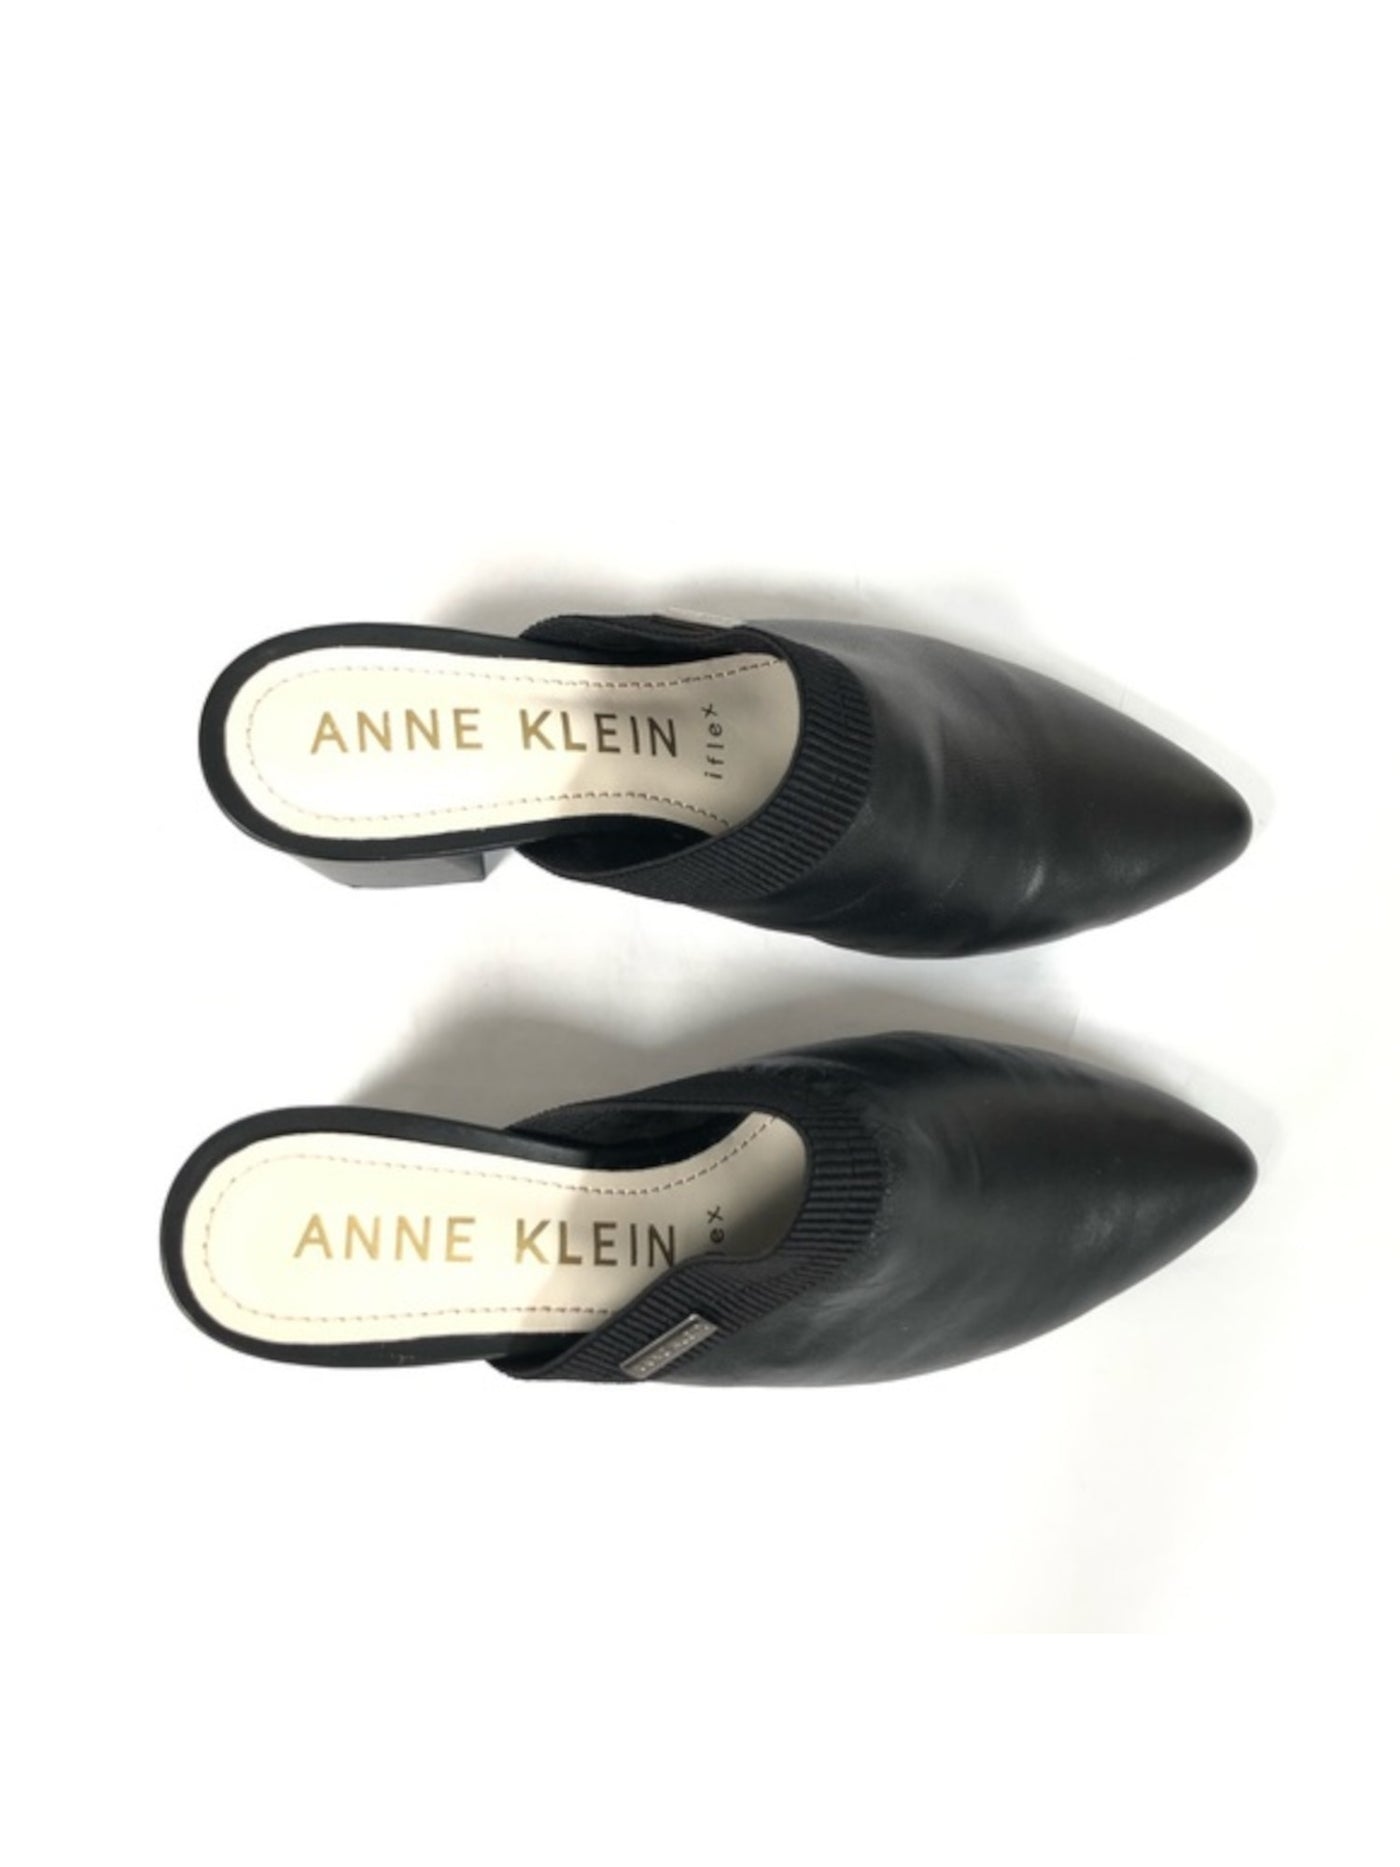 ANNE KLEIN Womens Black Metallic Logo Accent Breathable Stretch Therese Pointed Toe Block Heel Slip On Leather Heeled Mules Shoes 8.5 M